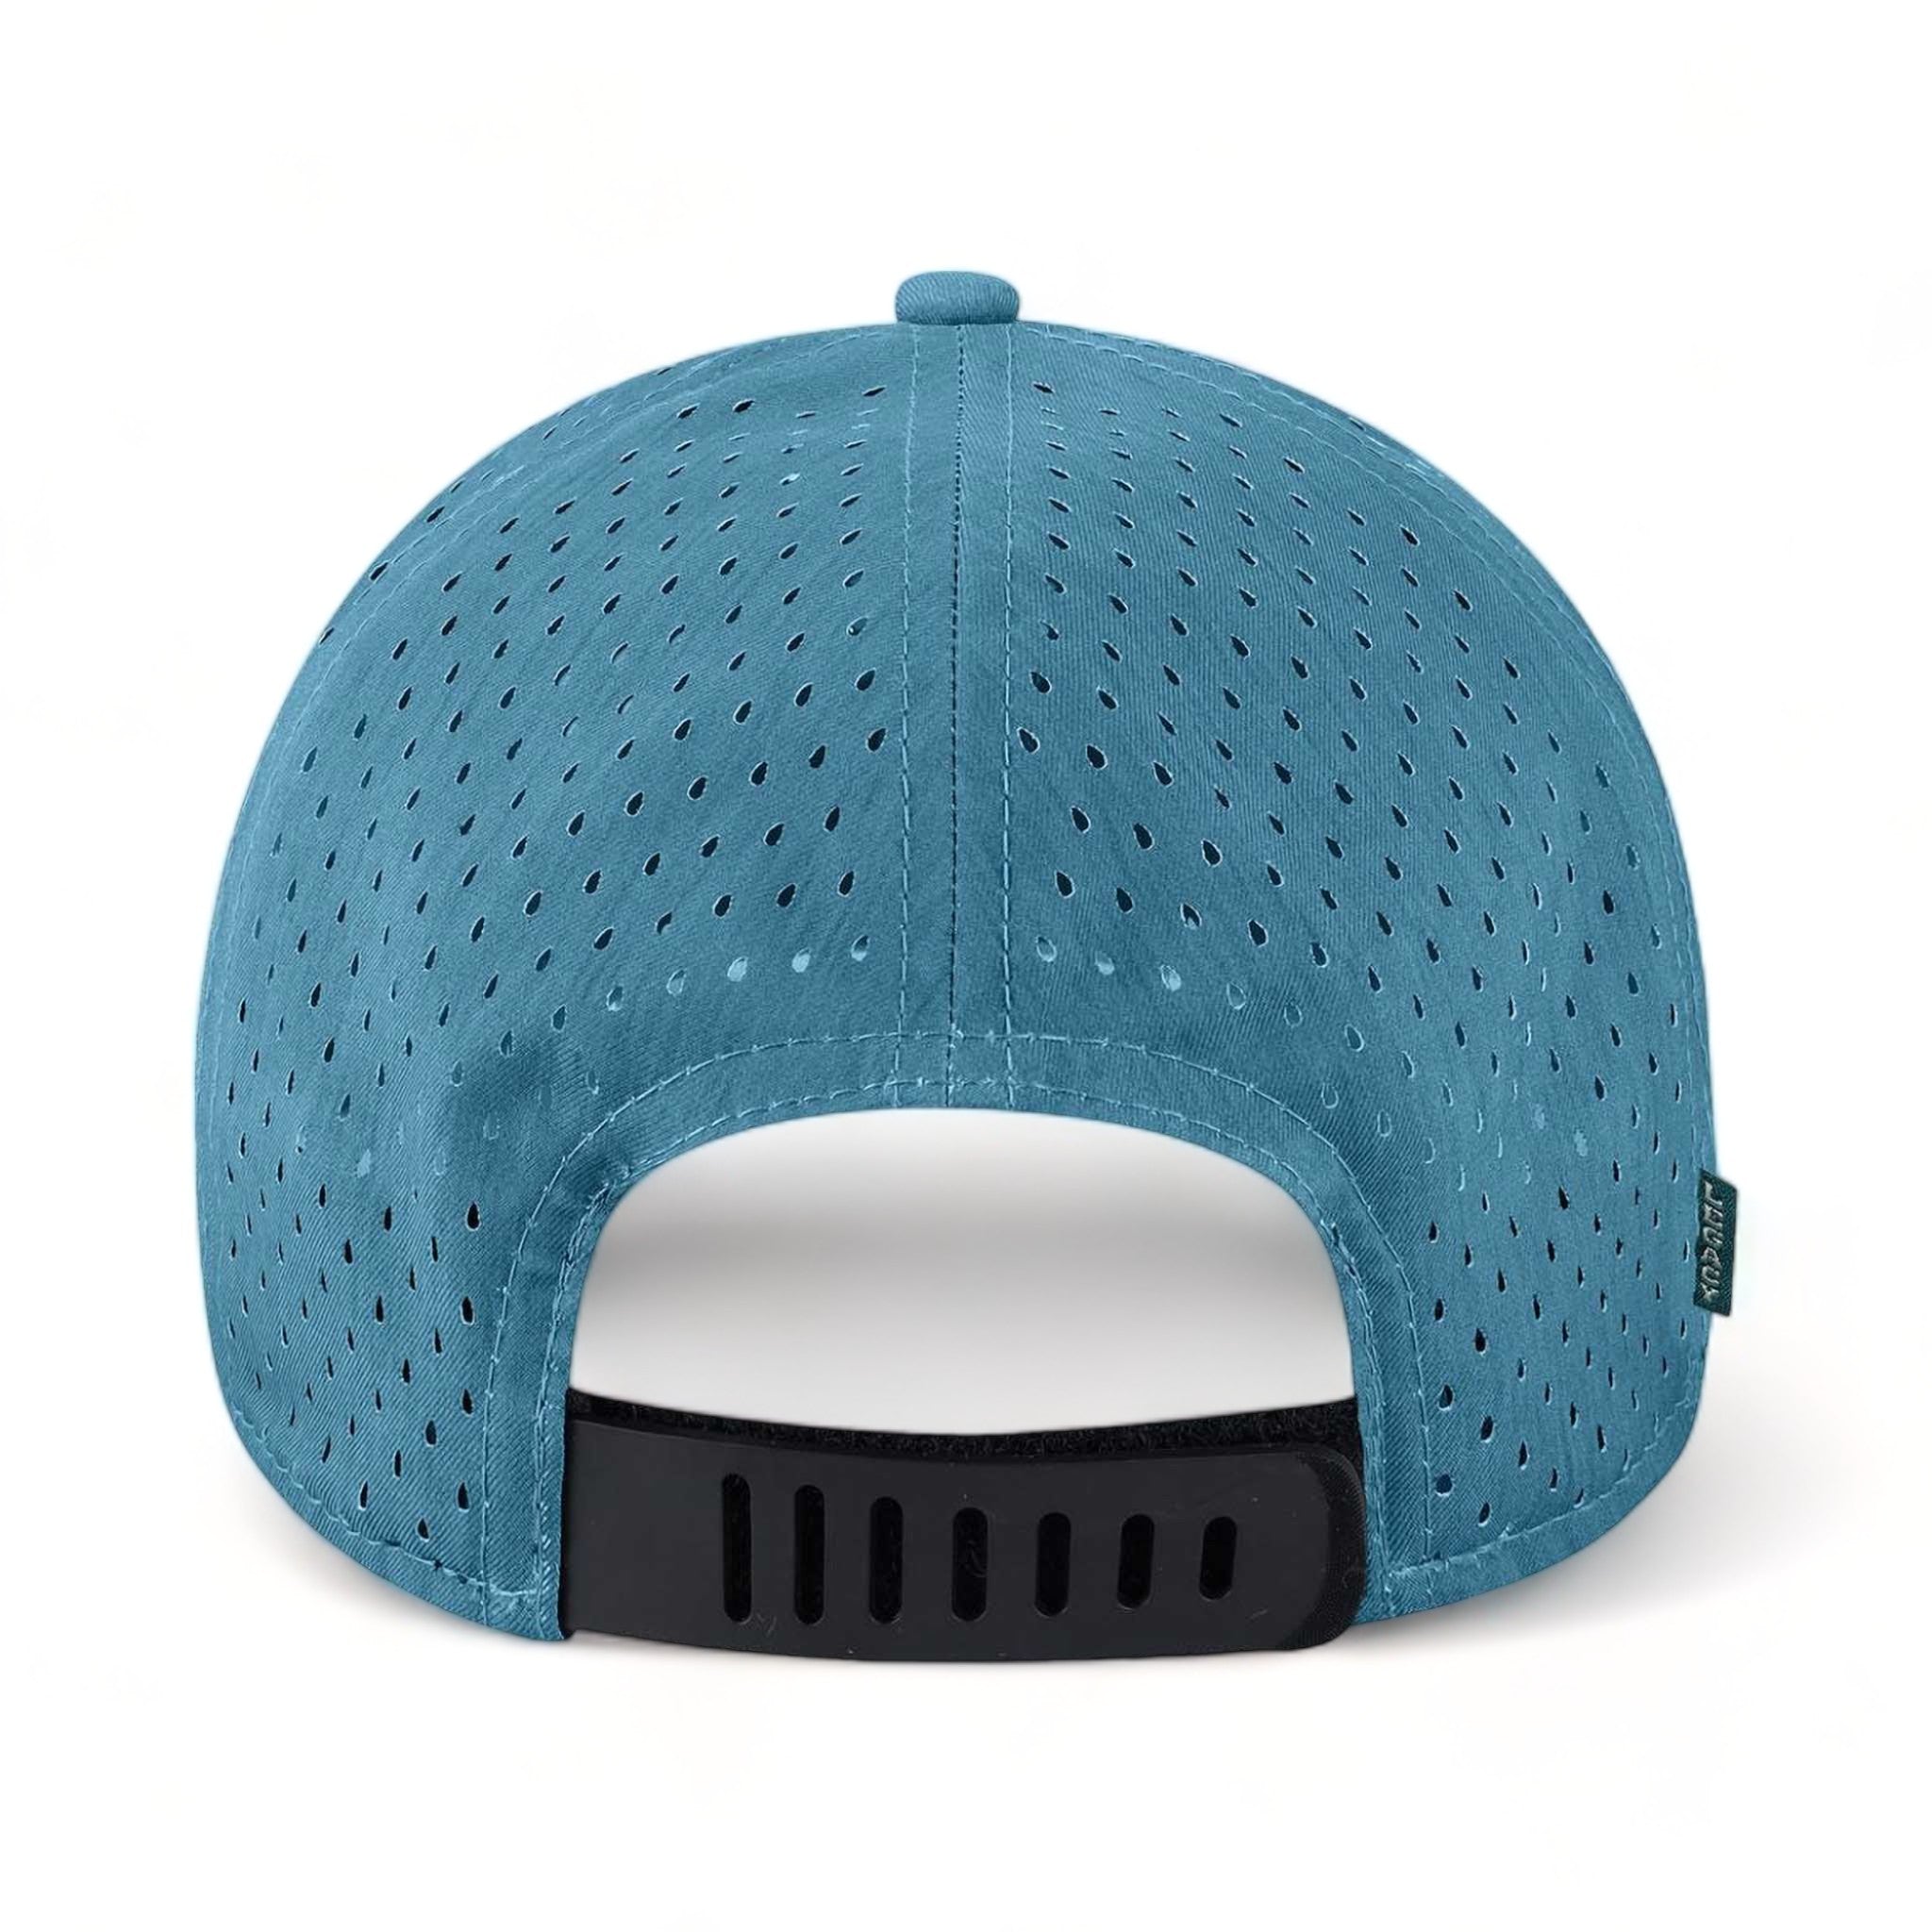 Back view of LEGACY REMPA custom hat in eco marine blue